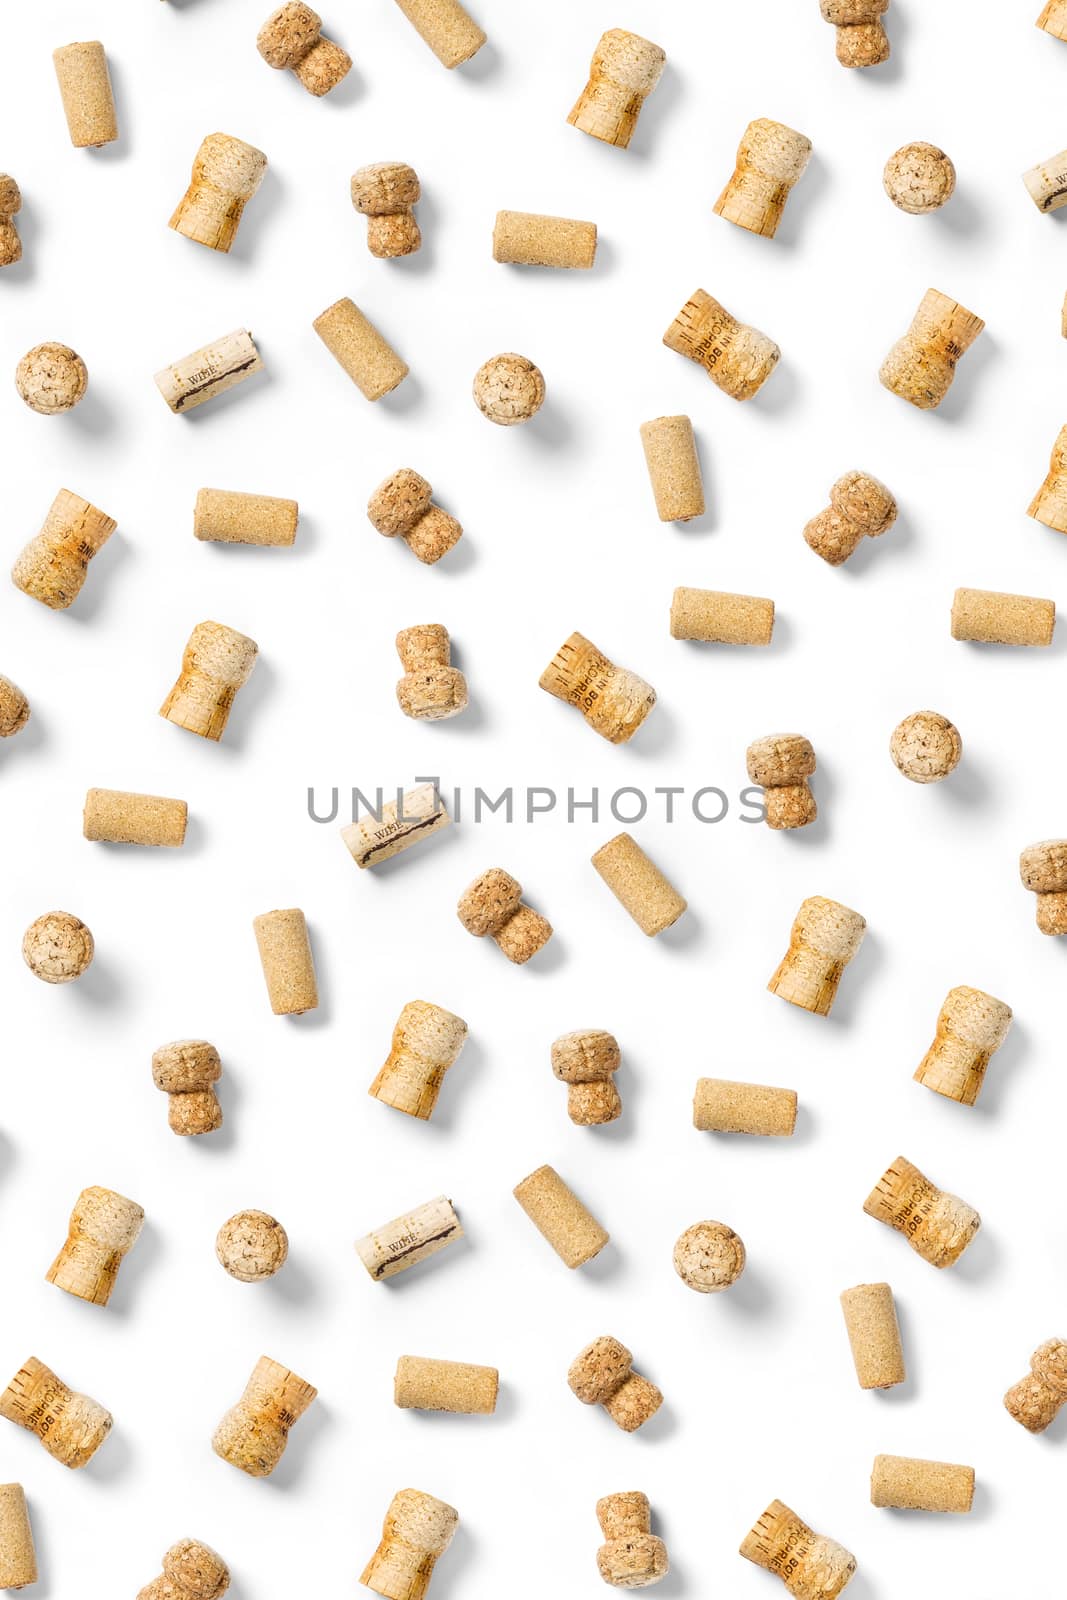 wine corks background on a white backlit background. wine background with corks and corkscrew for fabric print, paper print, wallpapers, design. by PhotoTime